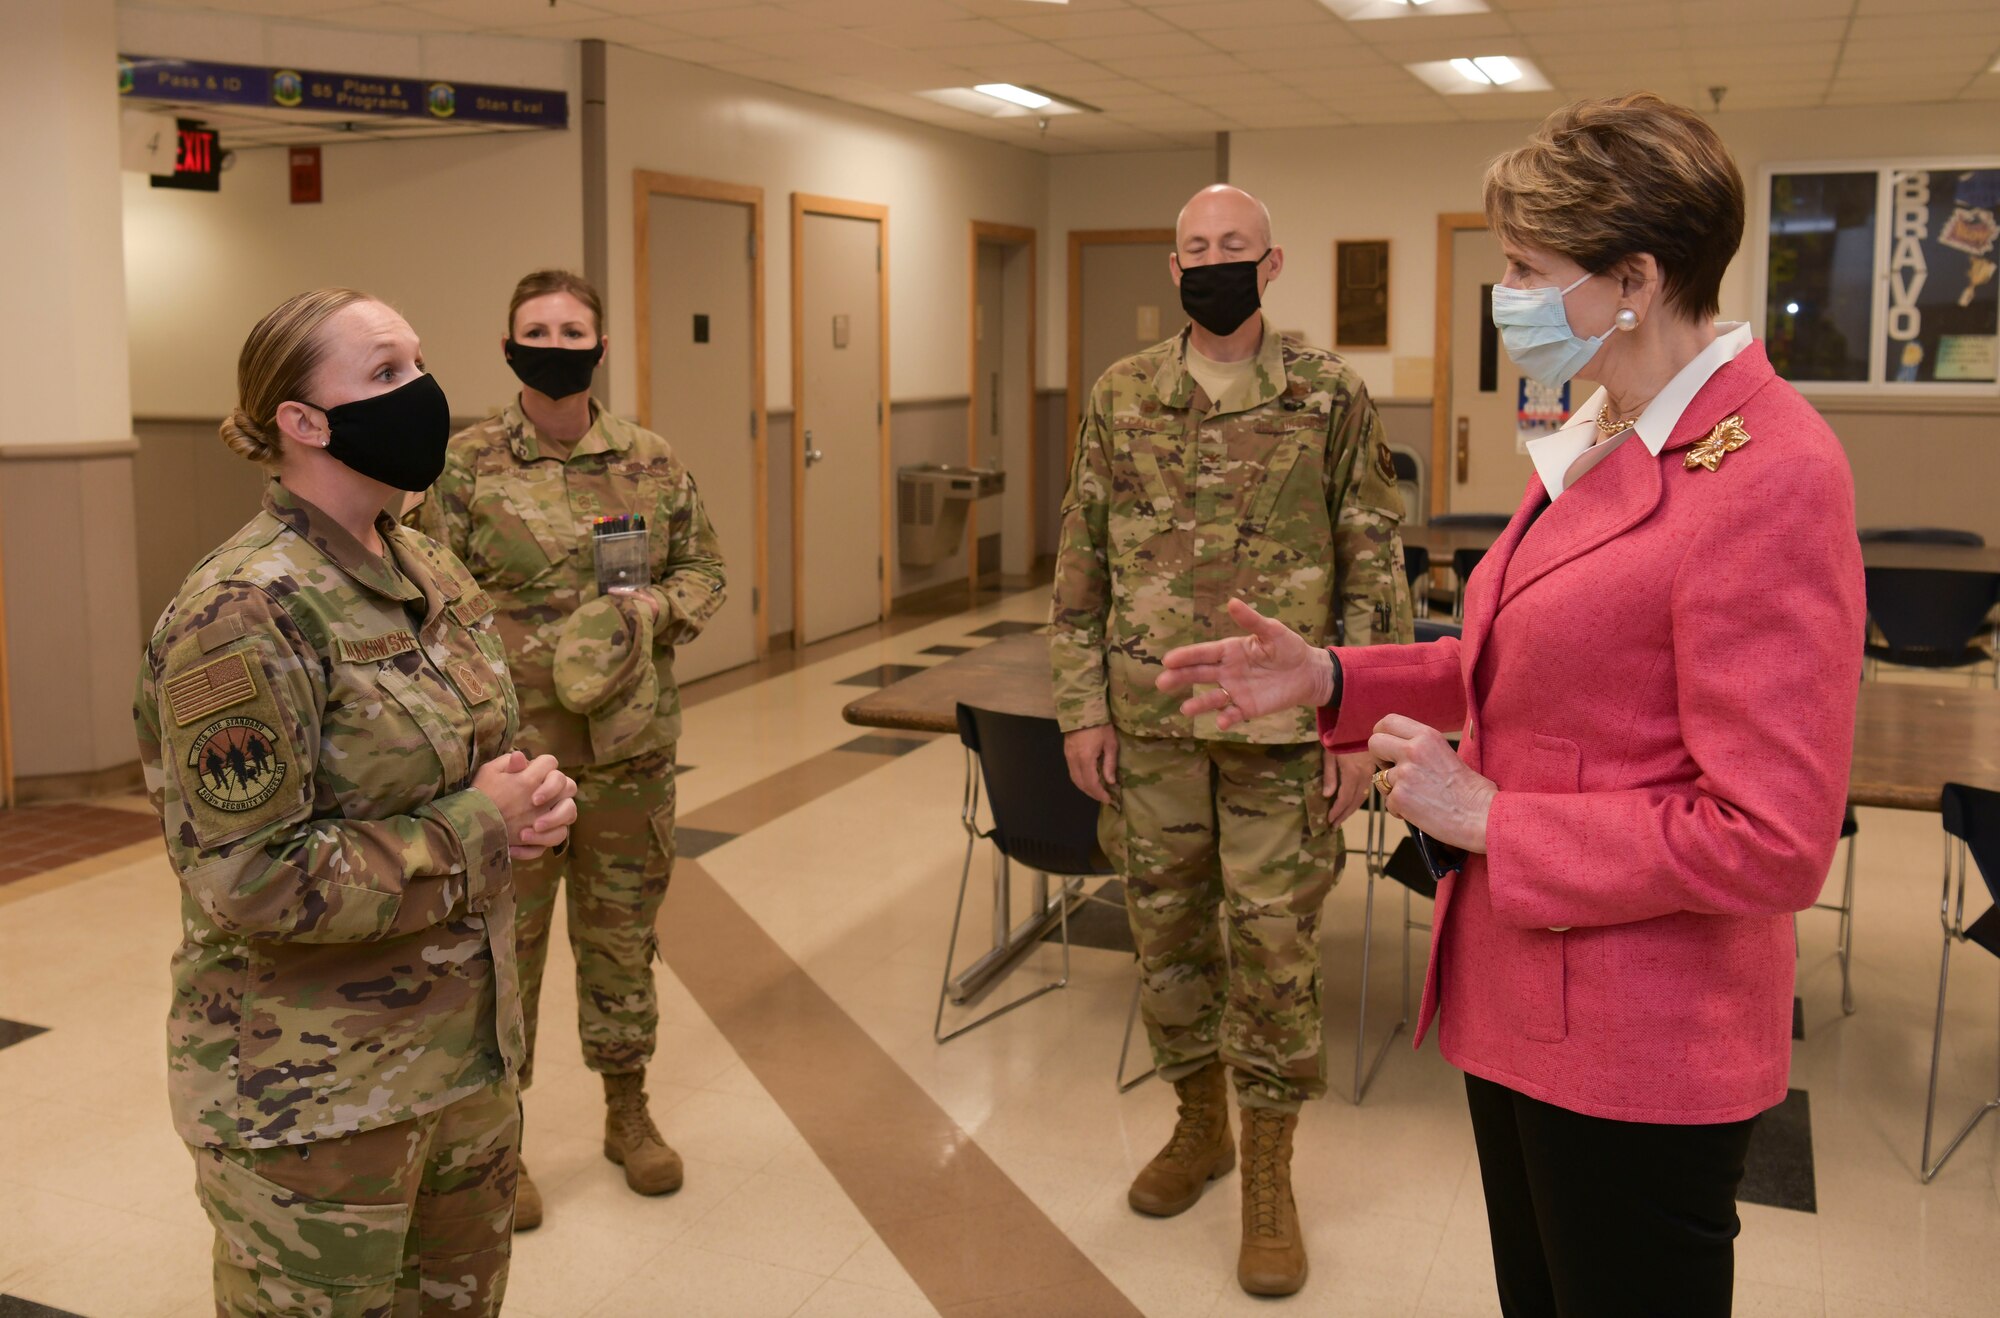 Secretary of the Air Force Barbara Barrett meets with 509th Security Forces Squadron members during a visit at Whiteman Air Force Base, Missouri, June 11, 2020. During her visit, Barrett spoke with base leaders, first responders and maintenance personnel across the installation to learn the B-2 Spirit stealth bomber’s critical role of global deterrence as part of the nuclear triad. (U.S. Air Force photo by Staff Sgt. Dylan Nuckolls)